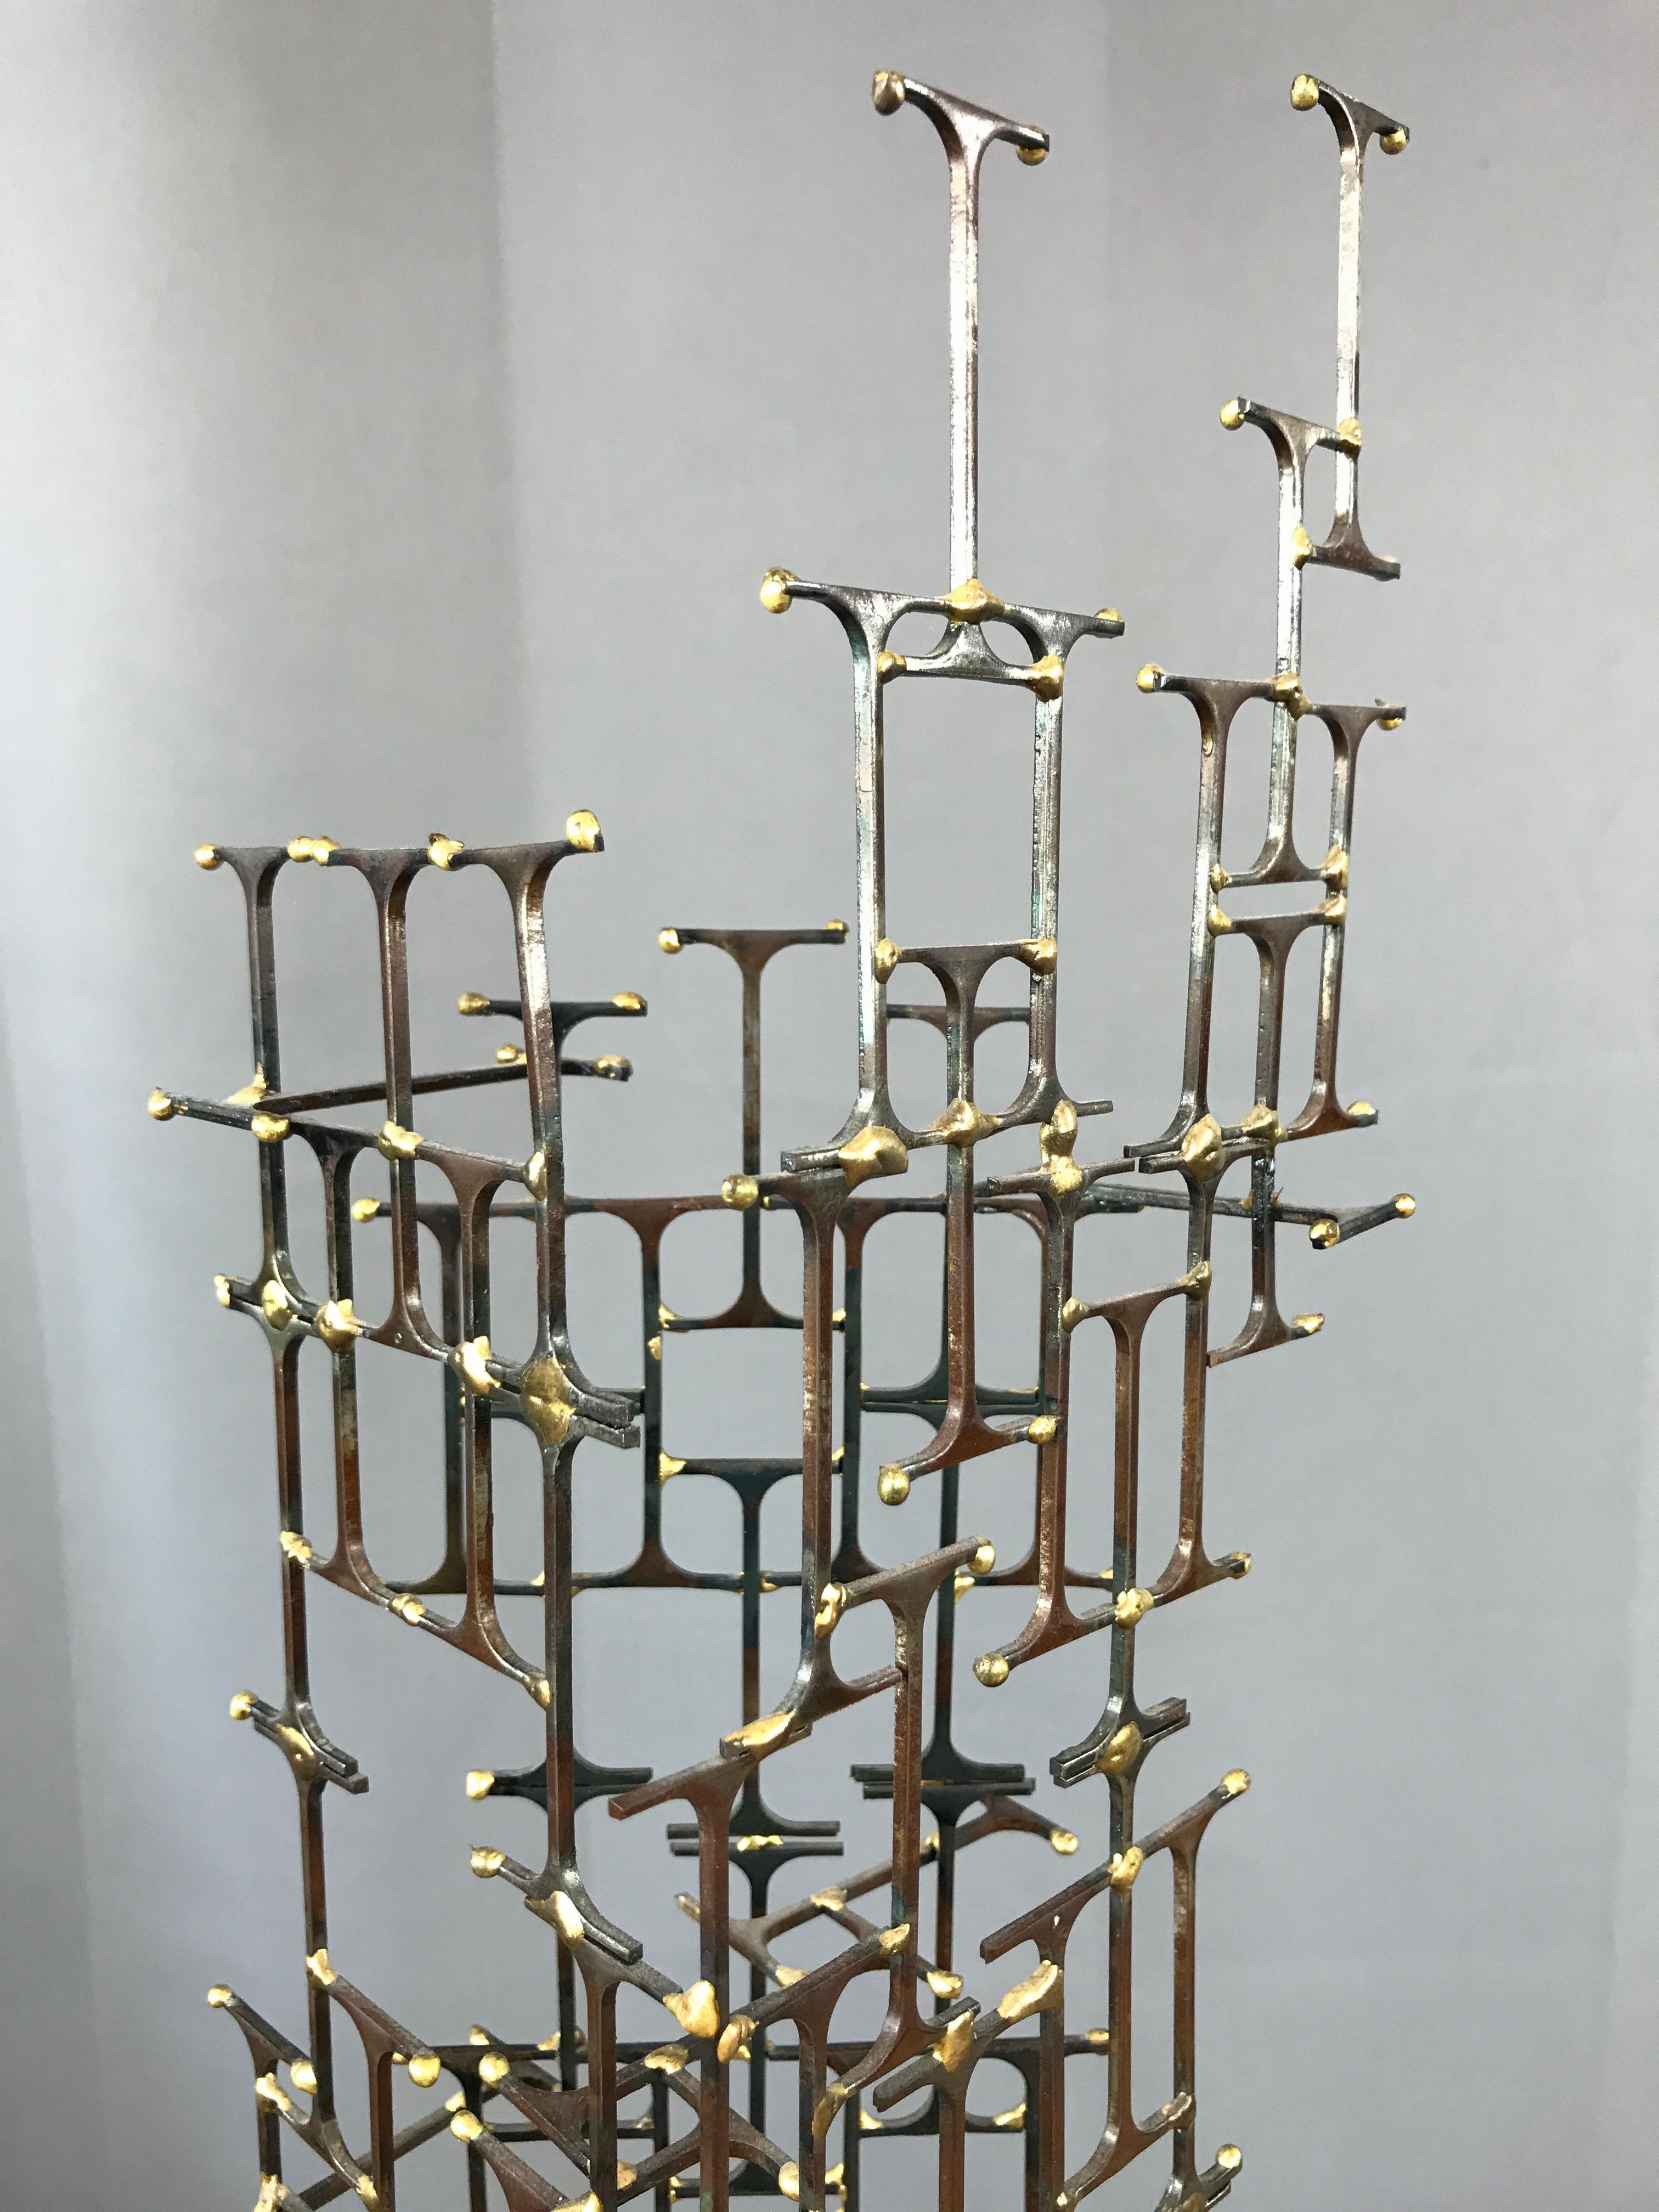 Brass Mario Jason Towering Brutalist Abstract Sculpture, Signed and Dated